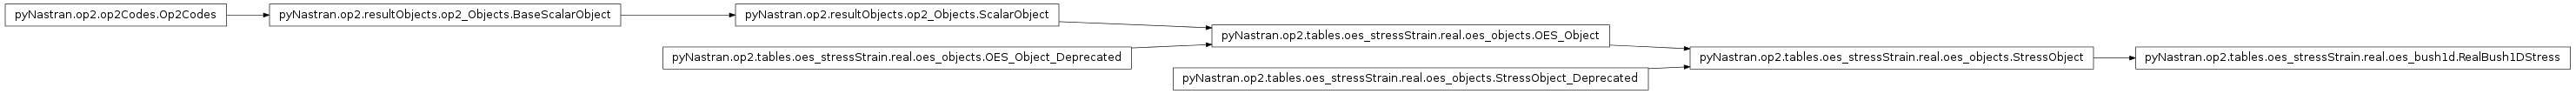 Inheritance diagram of pyNastran.op2.tables.oes_stressStrain.real.oes_bush1d